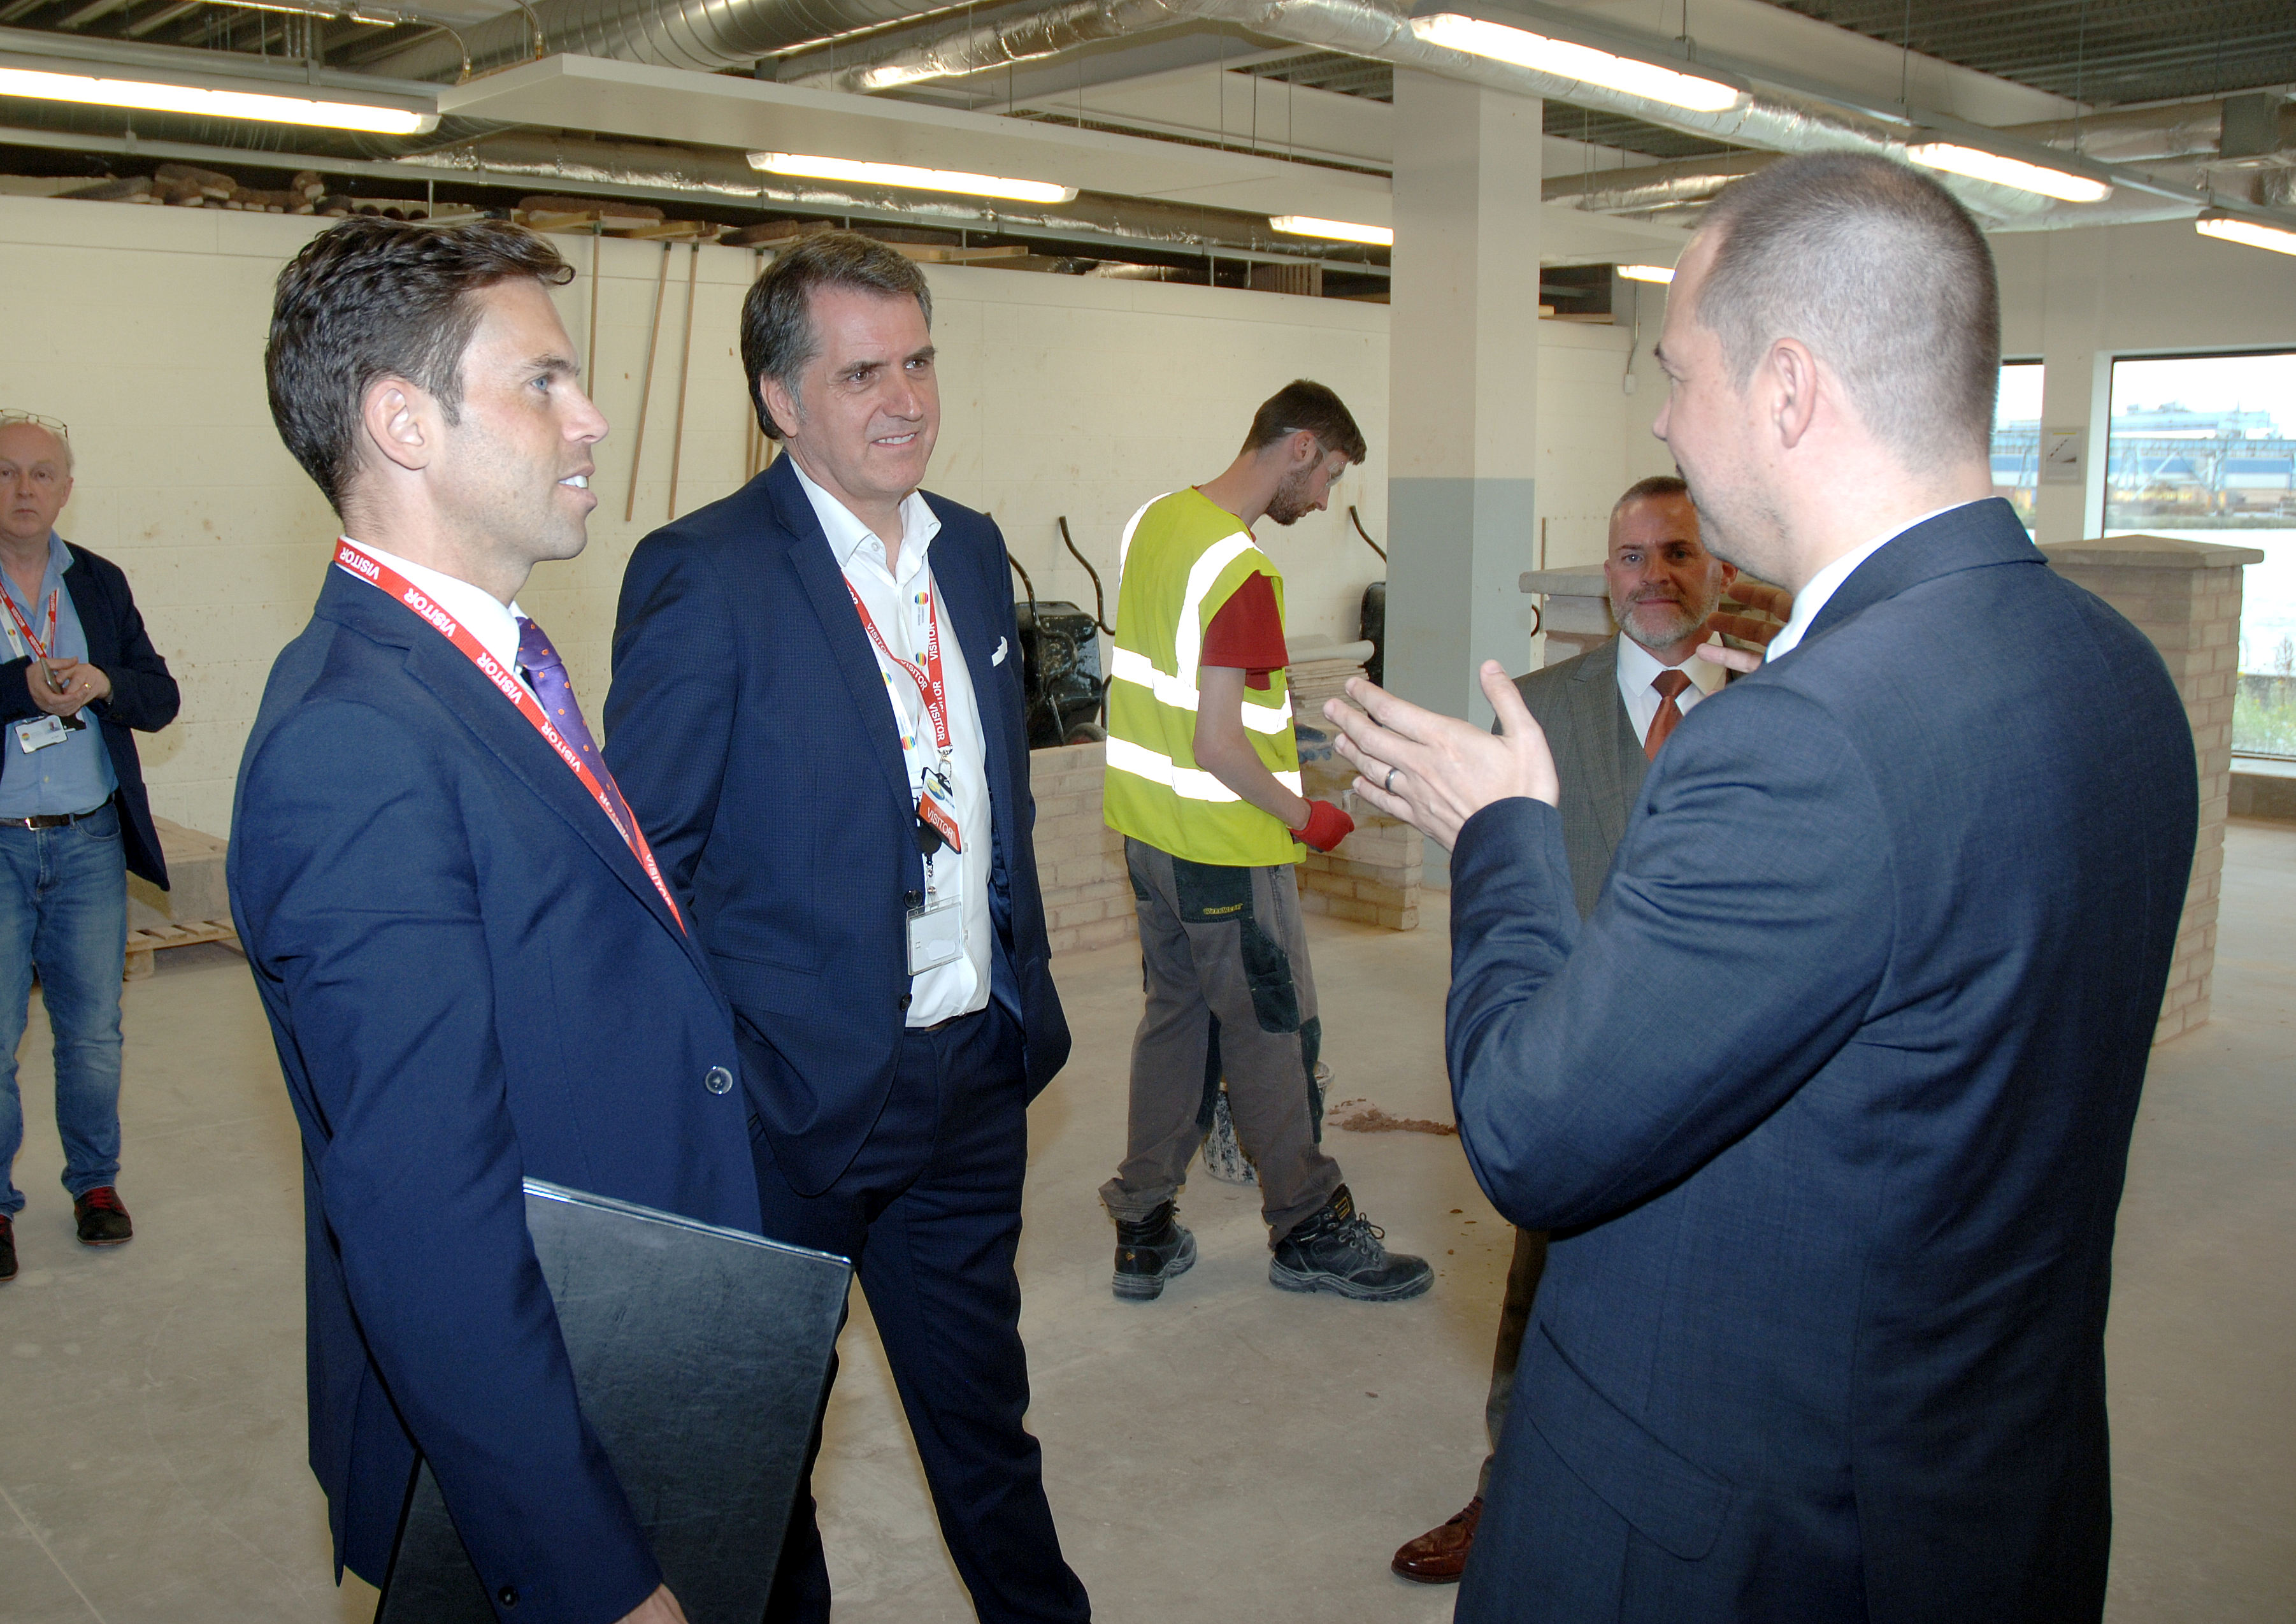 Metro Mayor Steve Rotheram and Ken Skates speaking to Michael Norton at the Wirral Waters campus